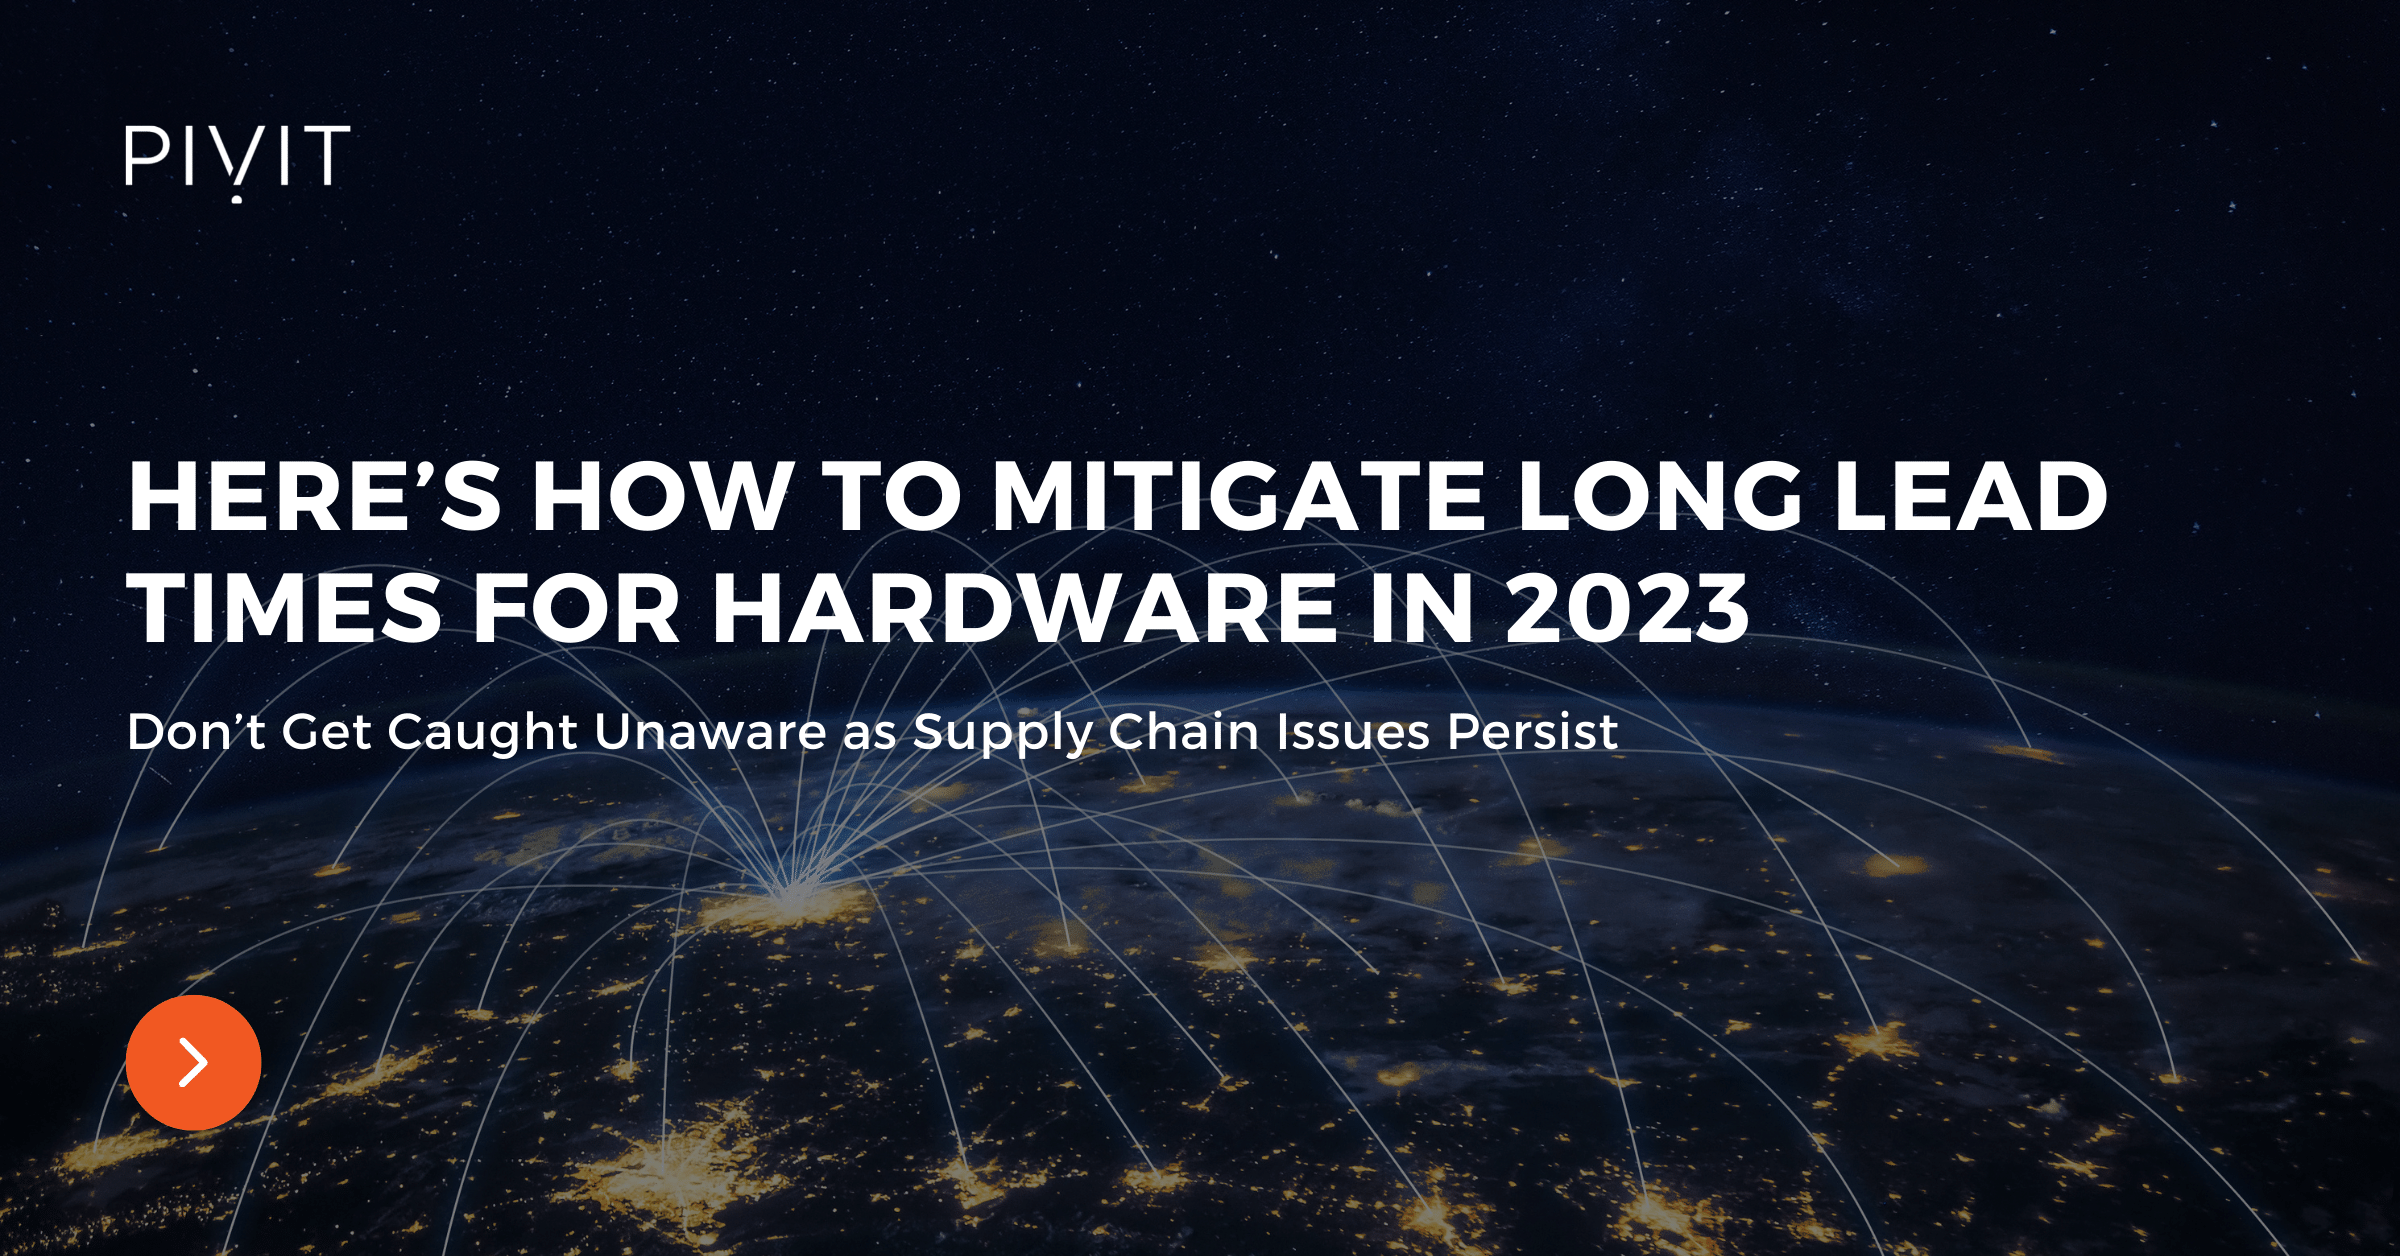 Here’s How to Mitigate Long Lead Times for Hardware in 2023 - Don’t Get Caught Unaware as Supply Chain Issues Persist